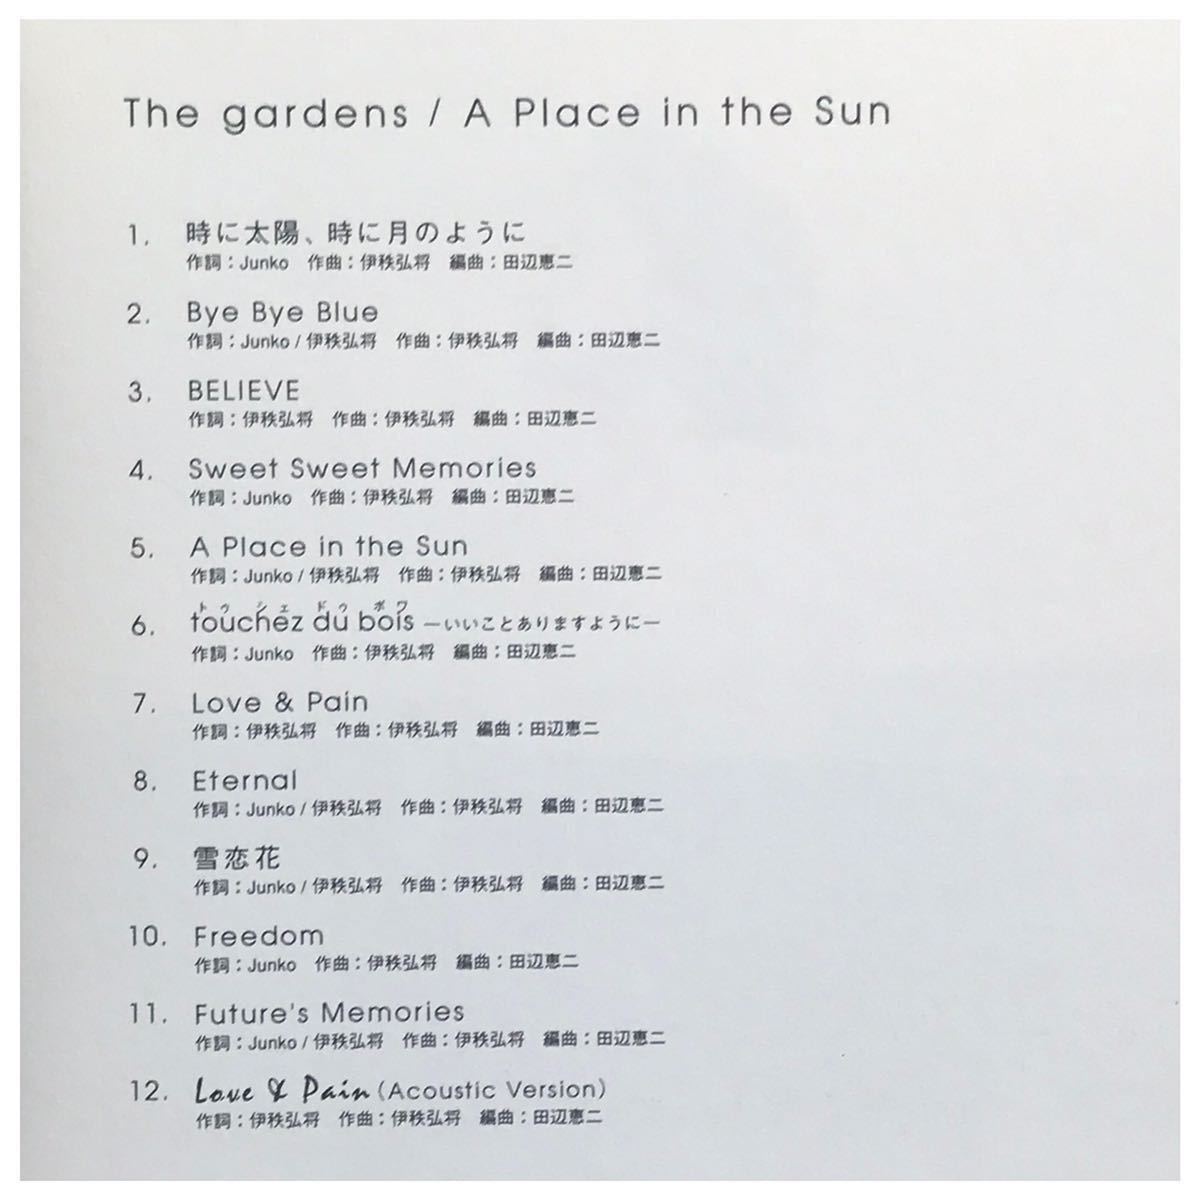 A Place in the Sun / The gardens《スリーブケース》